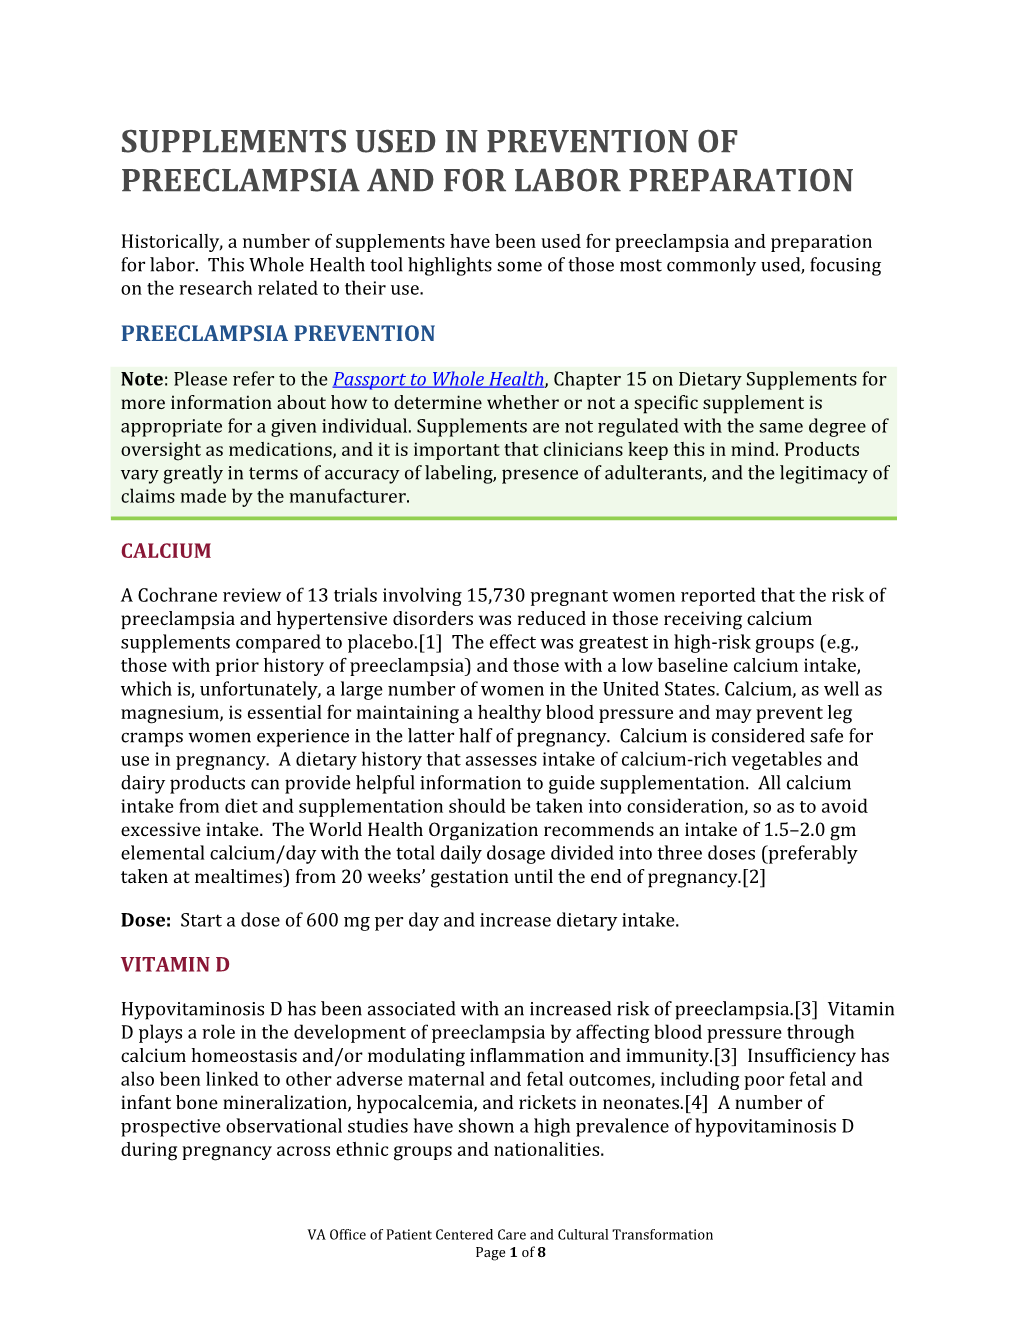 Supplements Used in Prevention of Preeclampsia and for Labor Preparation